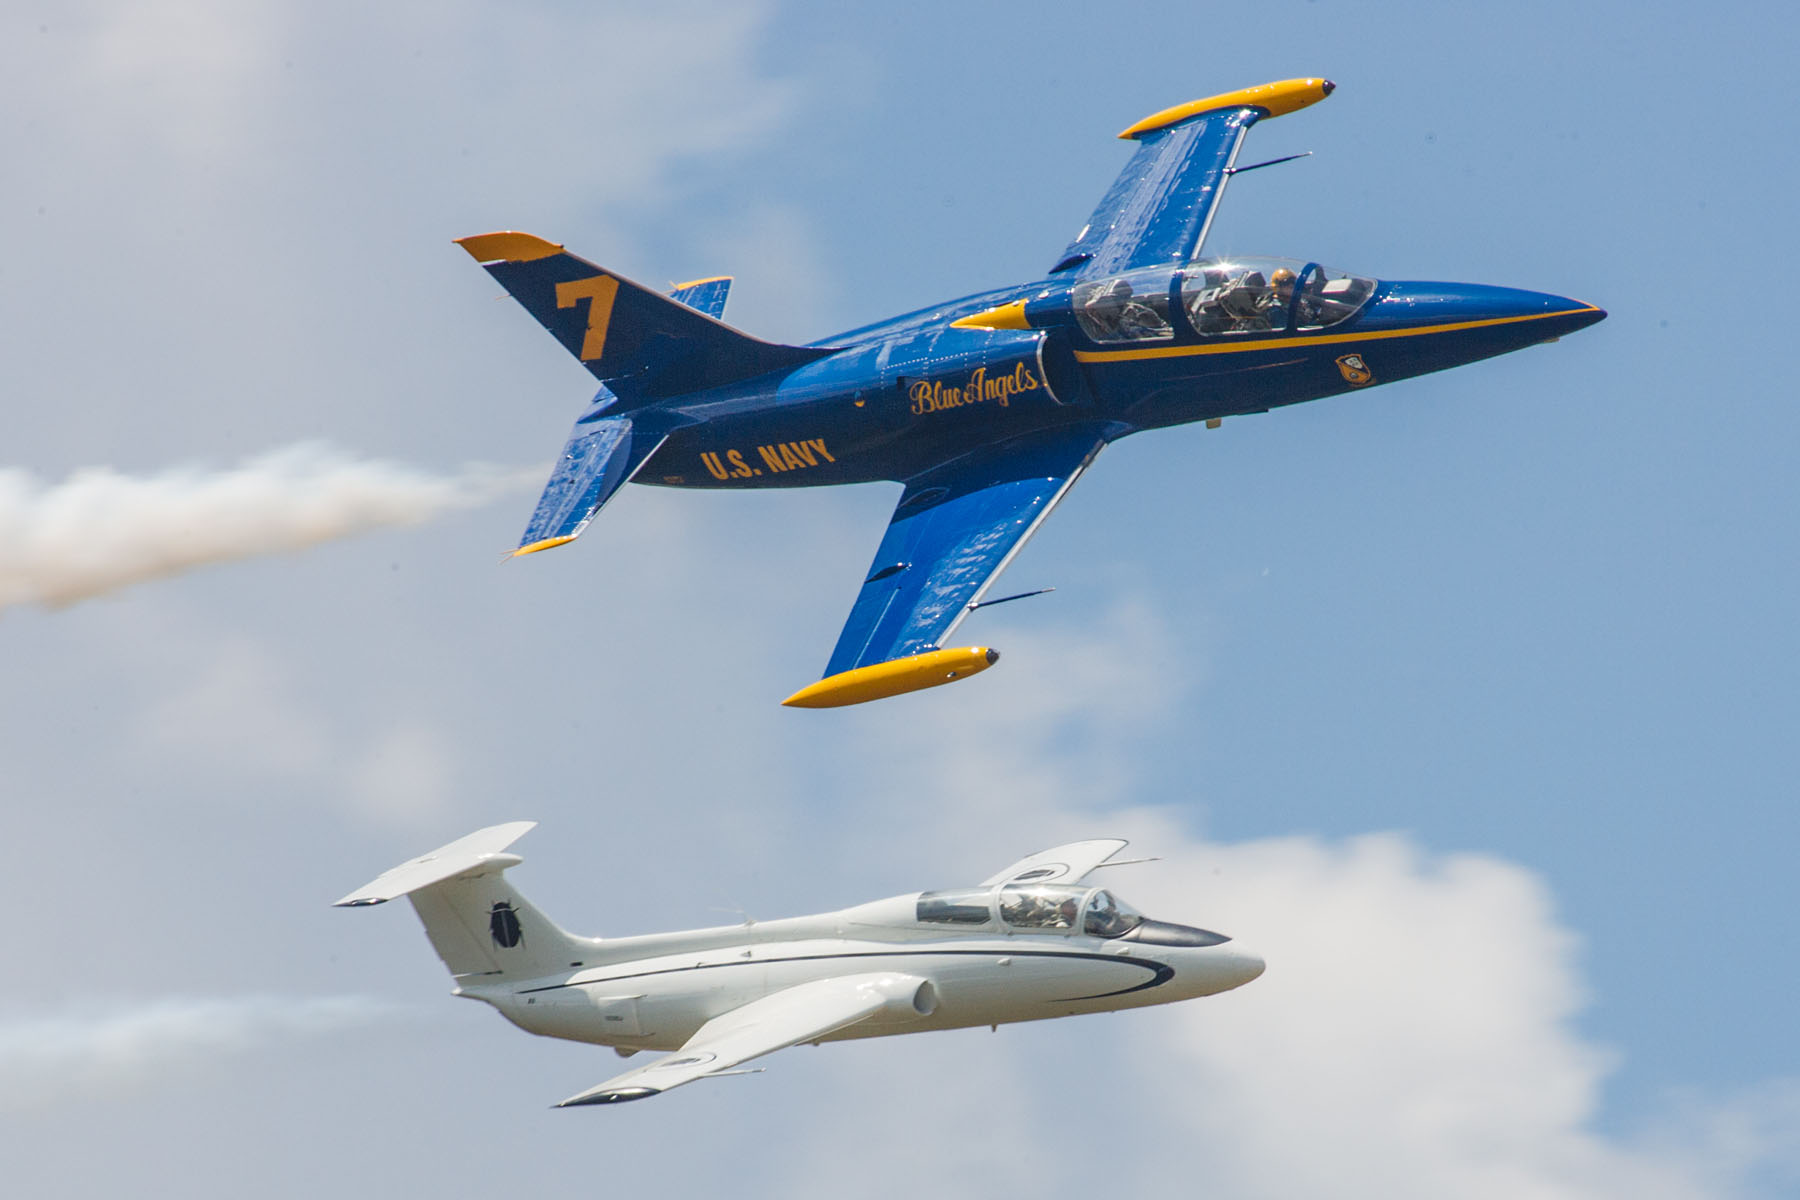 L-39 (blue) and L-29 jets of Czech origin, TICO Warbirds Air Show, Titusville, Florida.  Click for next photo.